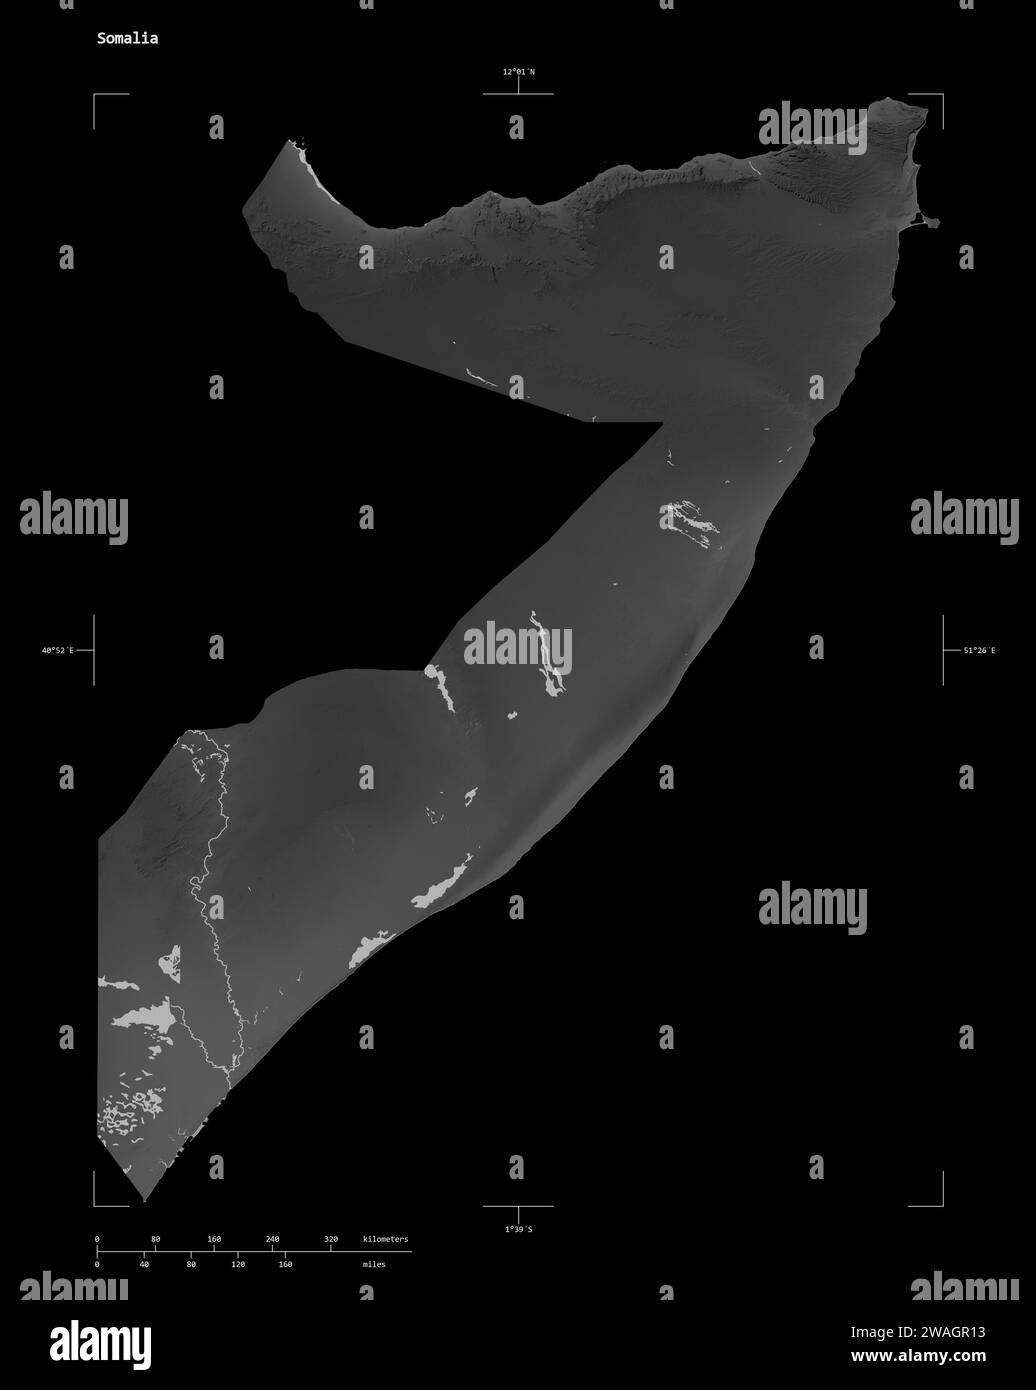 Shape of a Grayscale elevation map with lakes and rivers of the Somalia, with distance scale and map border coordinates, isolated on black Stock Photo